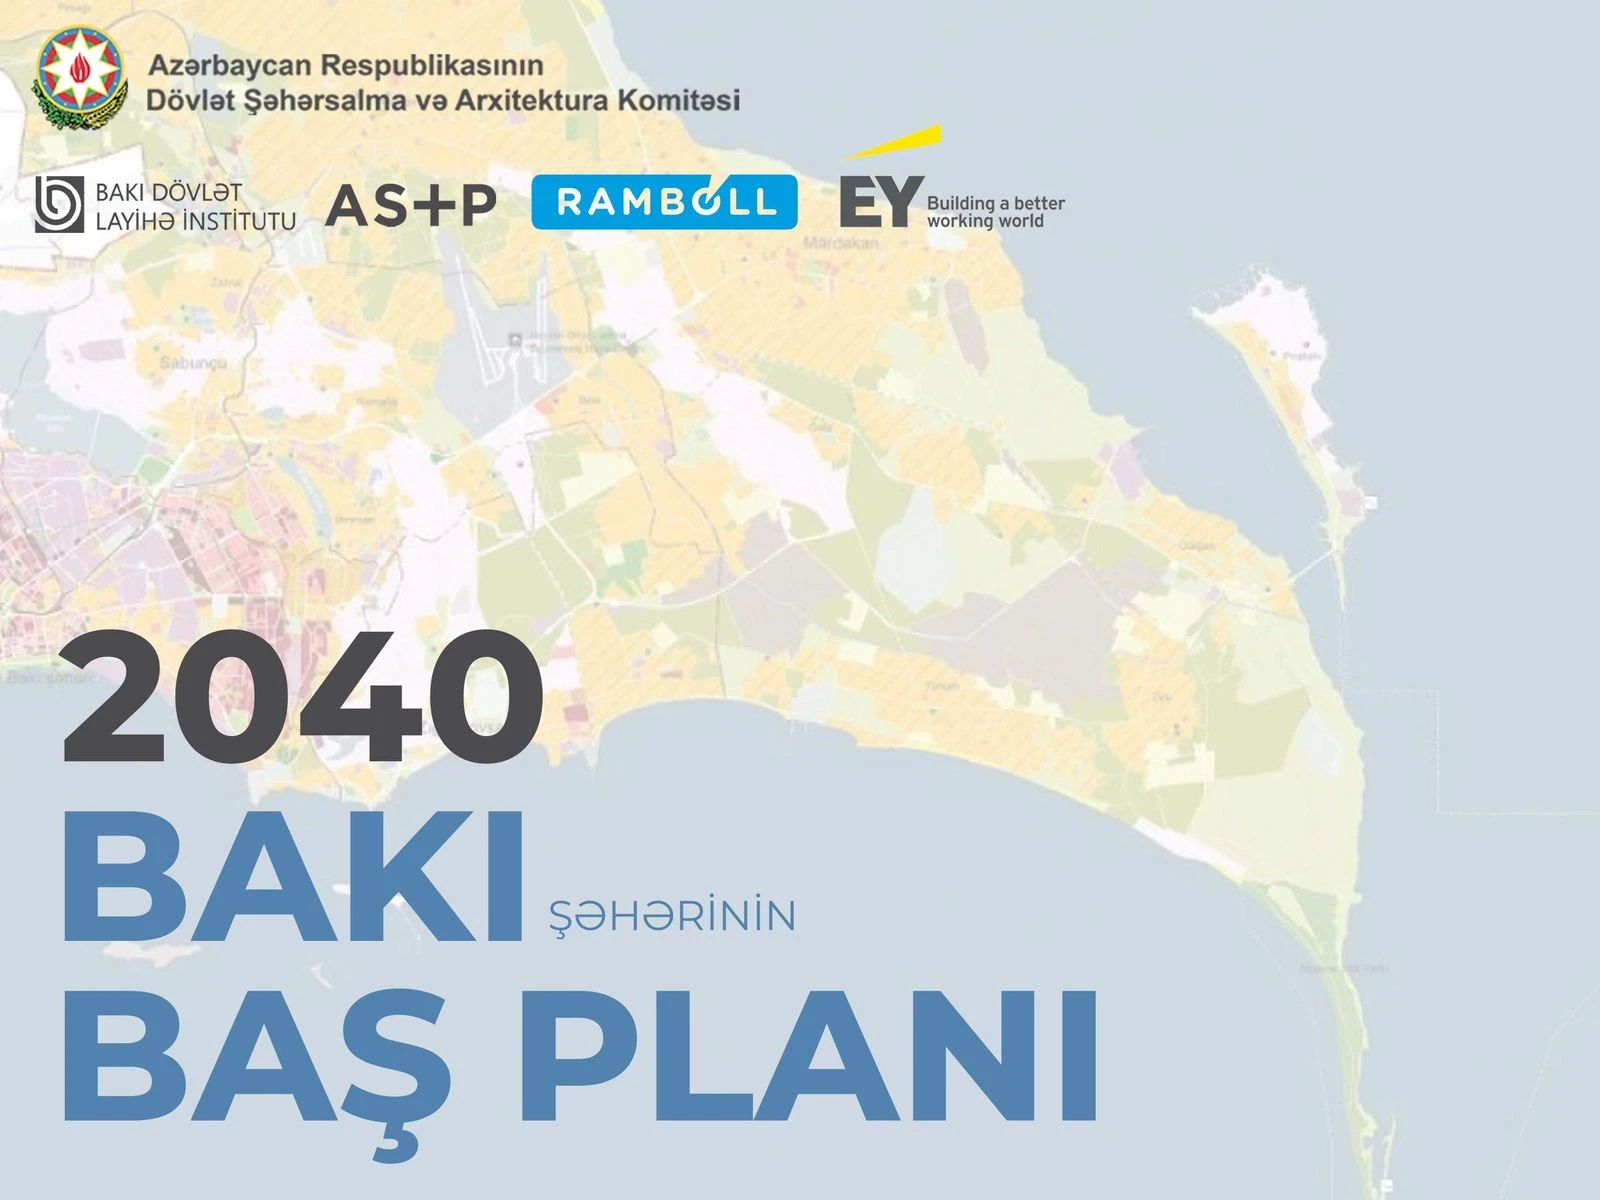 The Master Plan for Baku through to 2040 has been approved